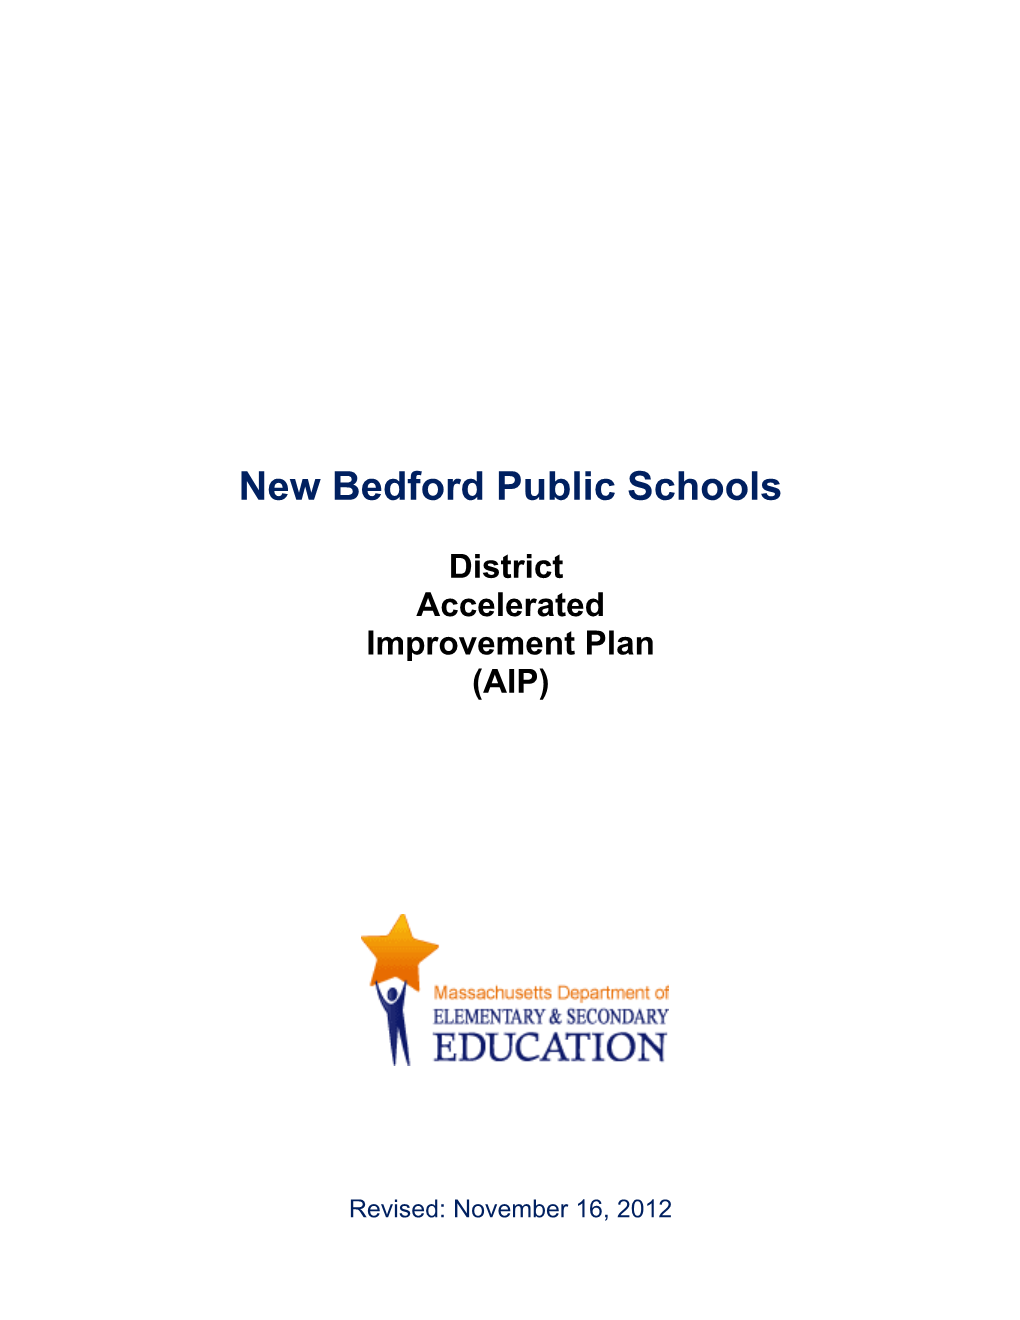 New Bedford Accelerated Improvement Plan 2012